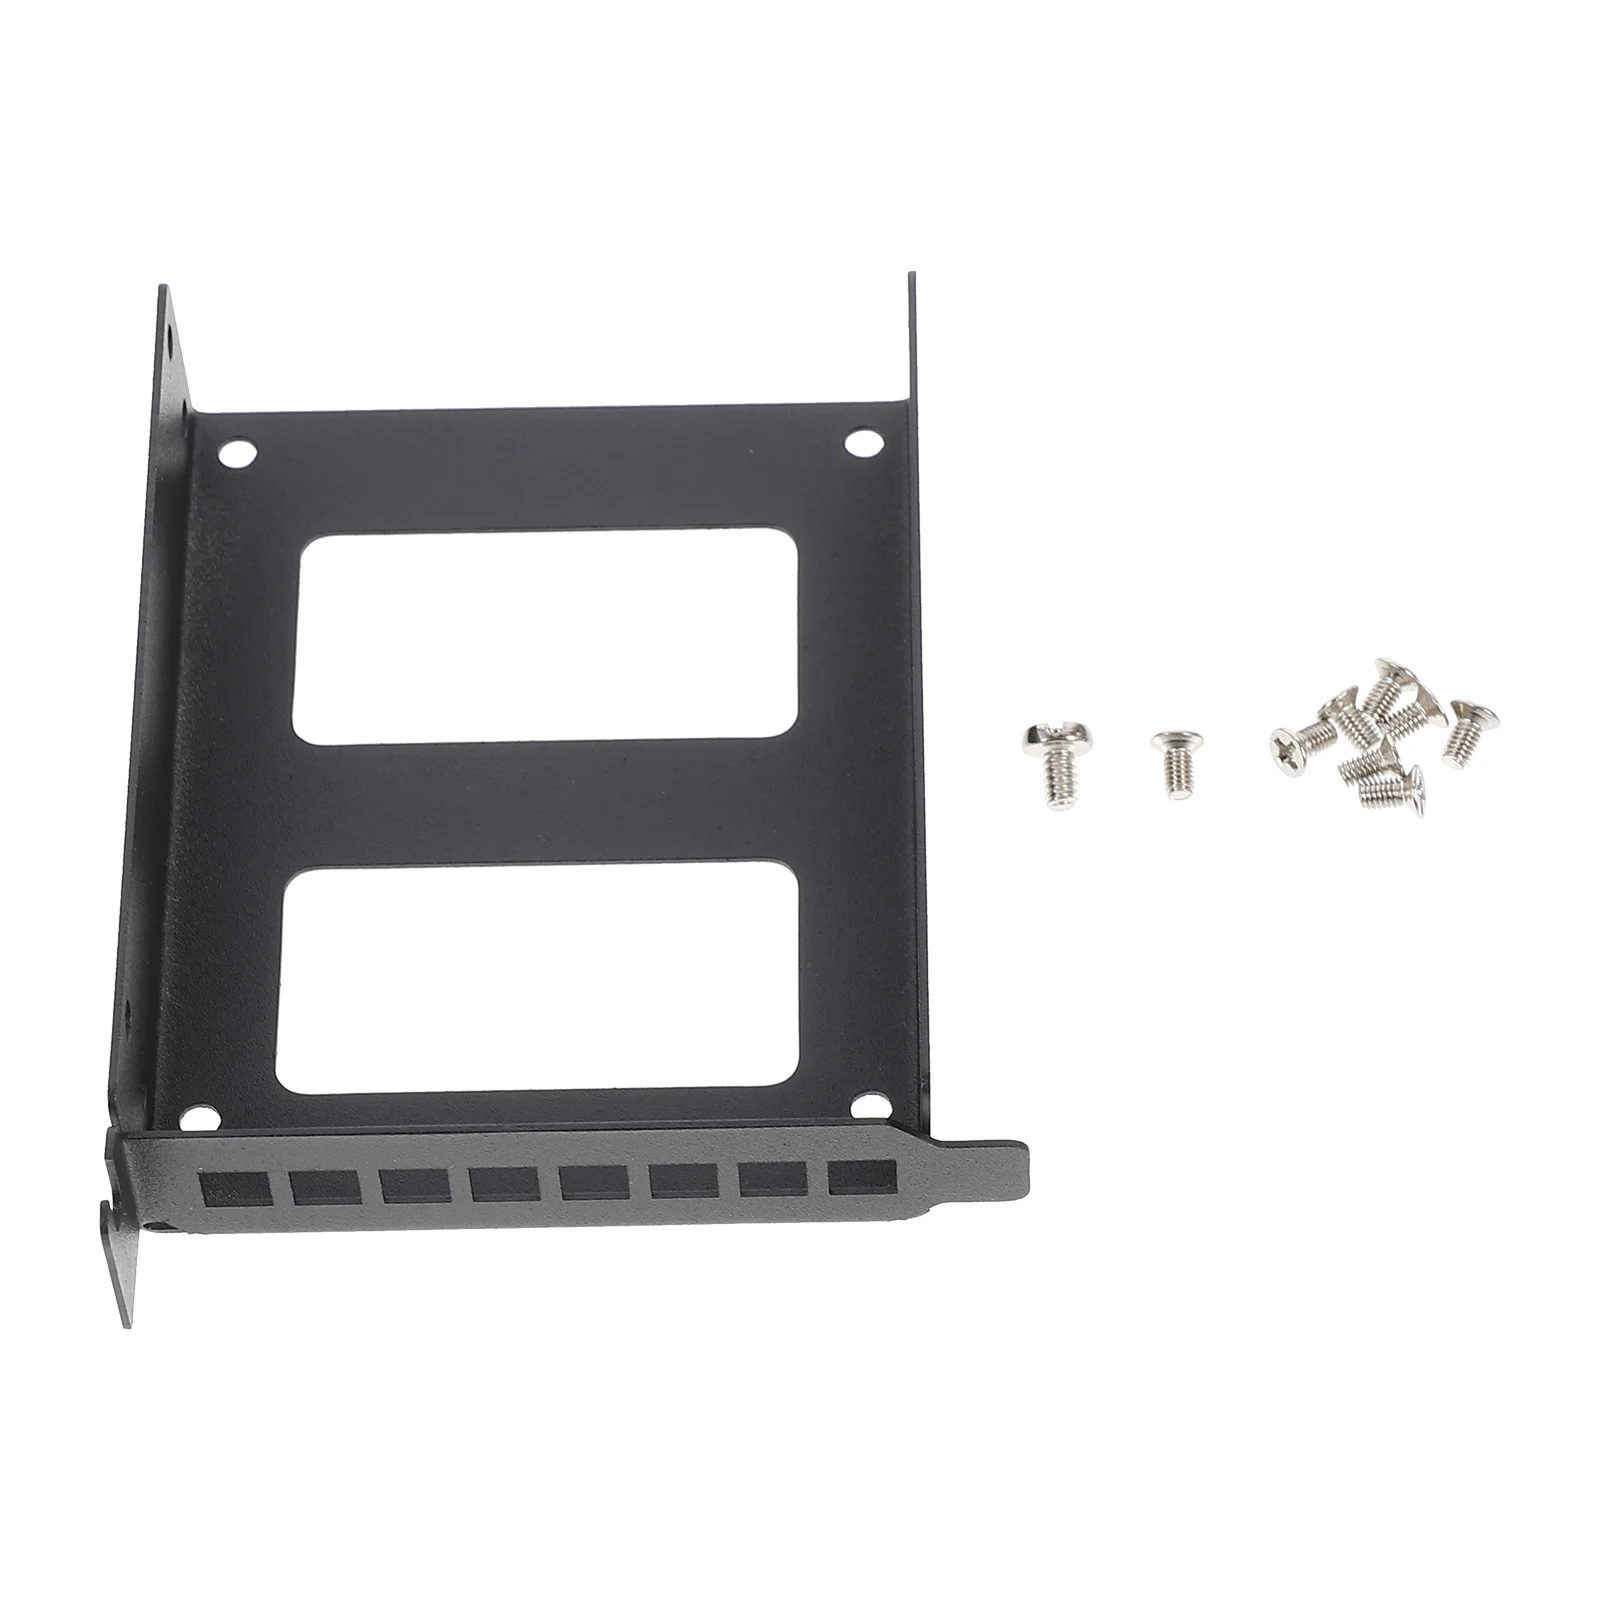 

1 PC PCI Slot Expansion Rear Bracket Aluminum Alloy Hard Drive Mounting Bracket SSD HDD 2.5 inch Disk Bay